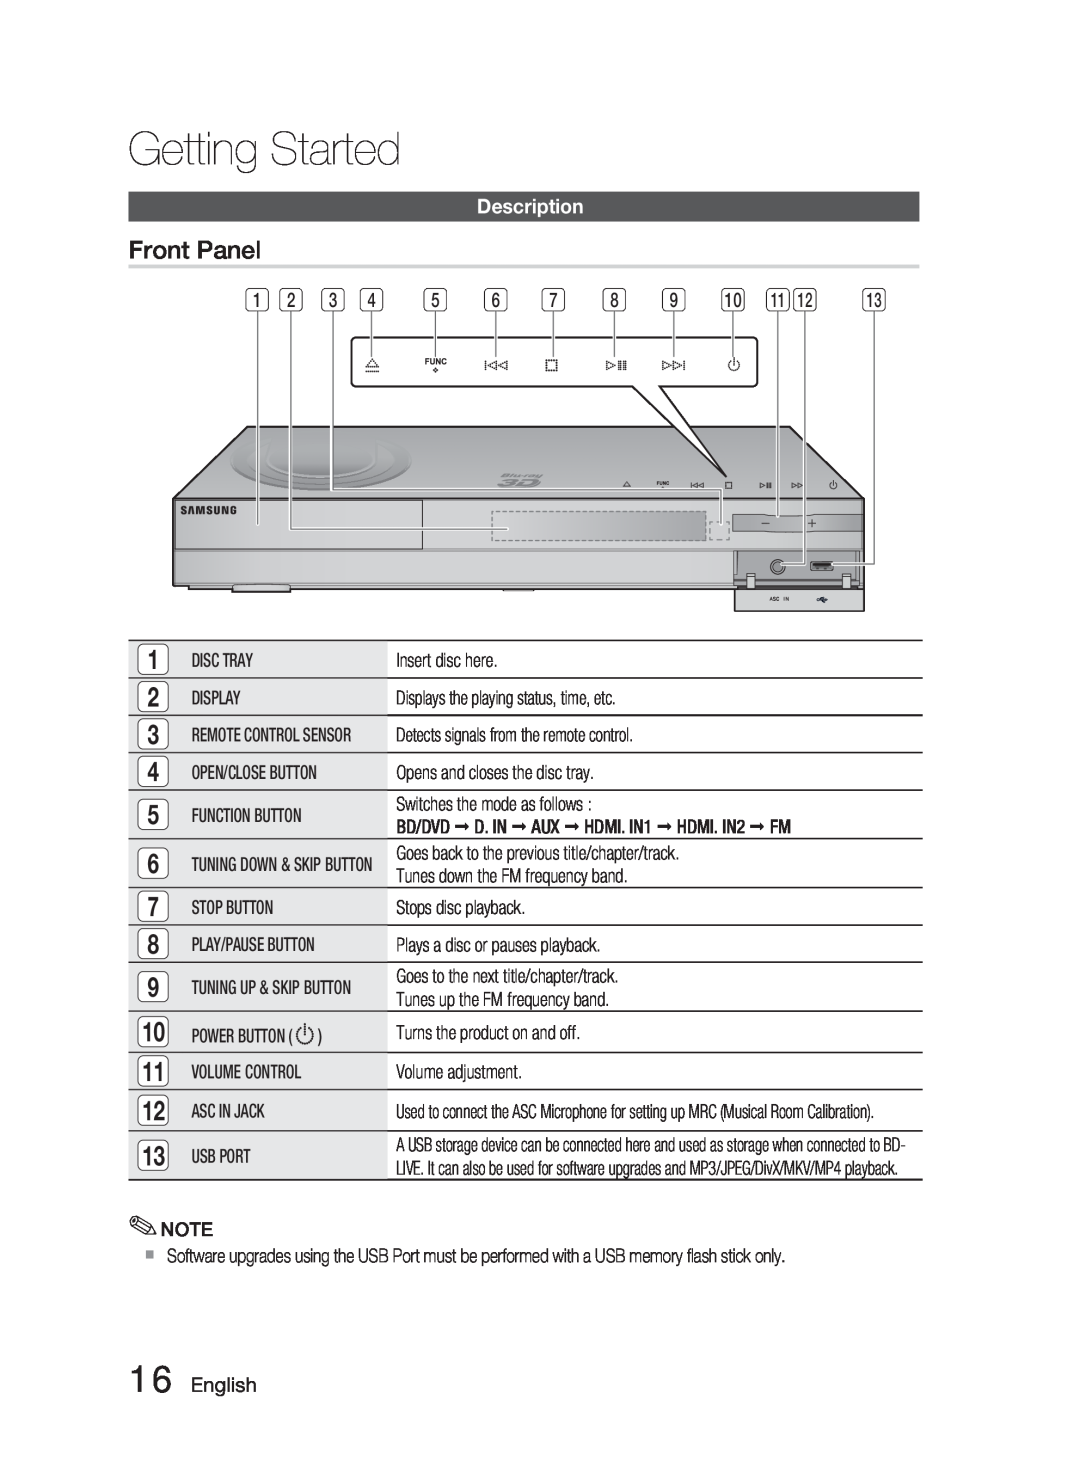 Samsung AH68-02279R user manual Front Panel, Description, English, Getting Started 